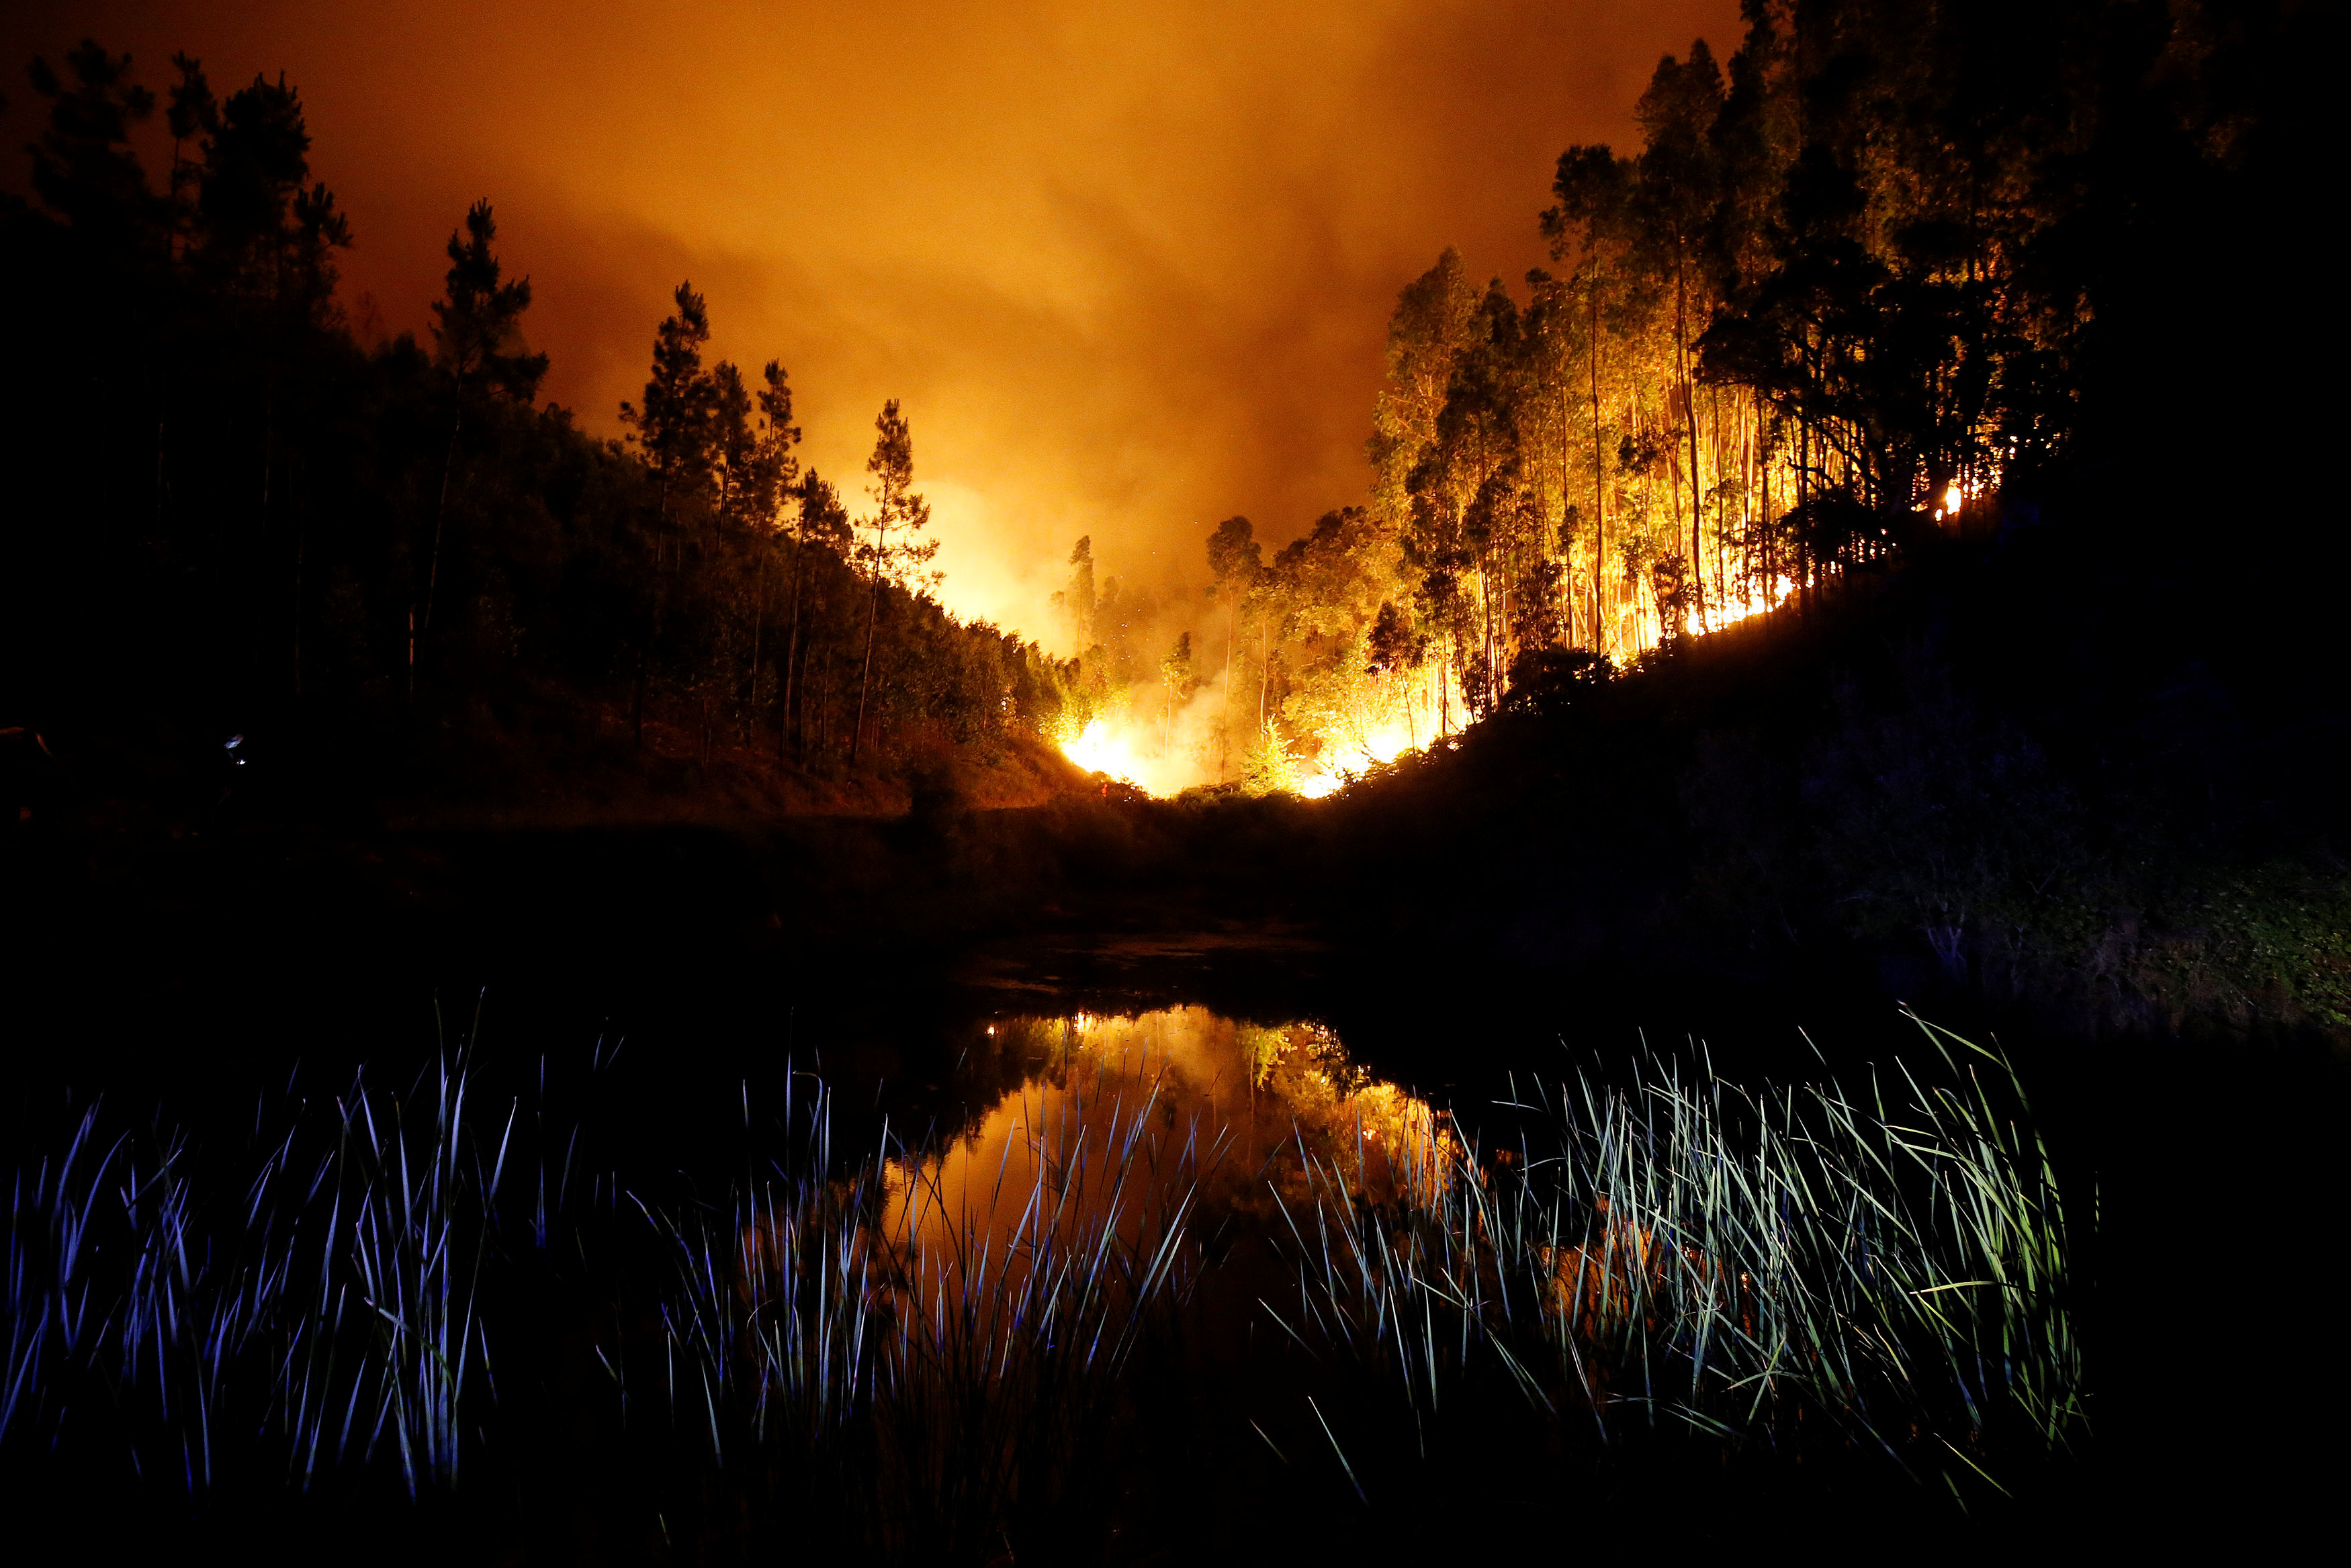 Death toll from forest fire raging in Portugal climbs to 62